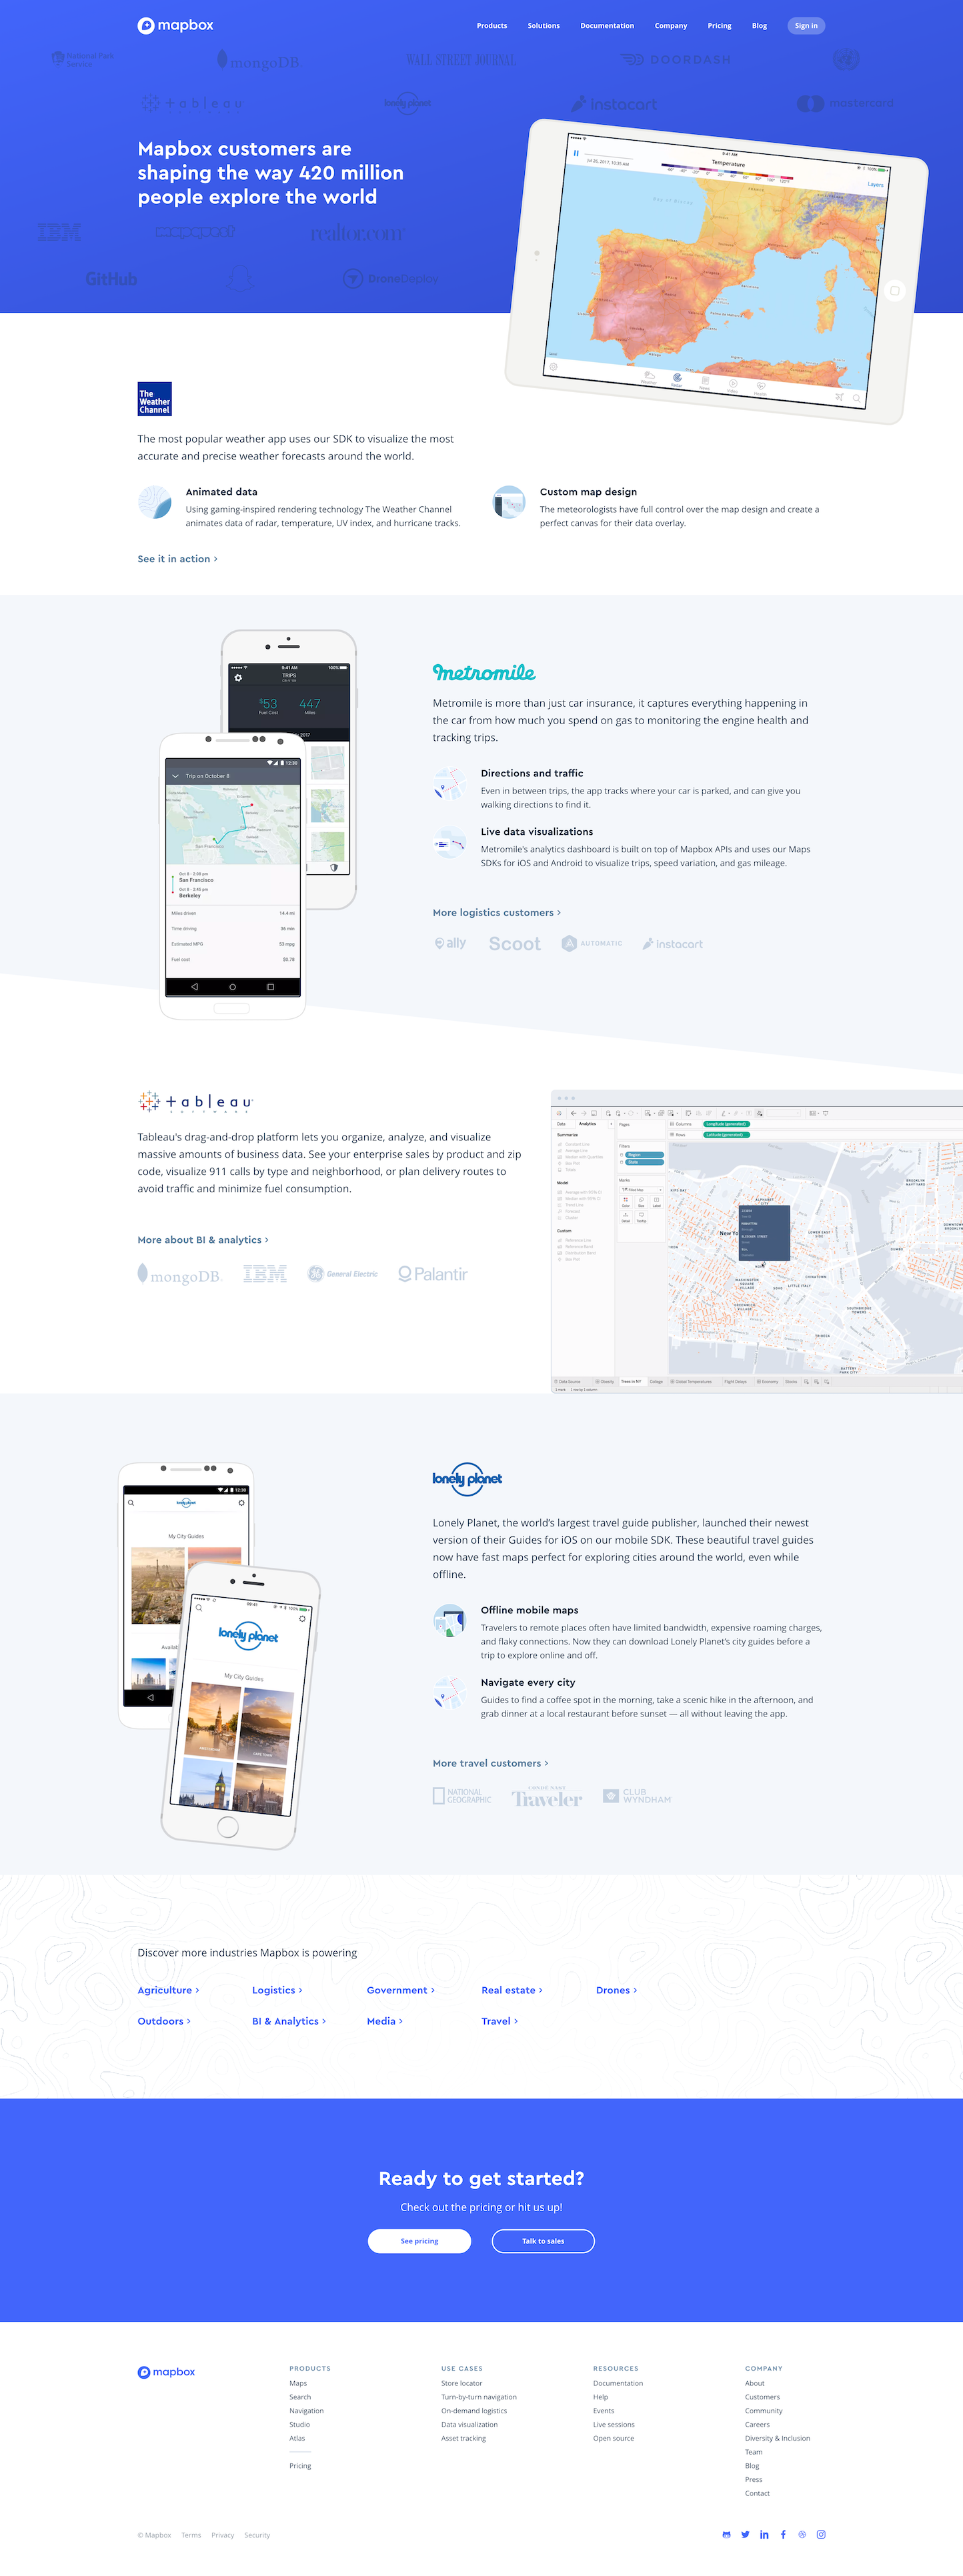 Screenshot of the Showcase page from the Mapbox website.